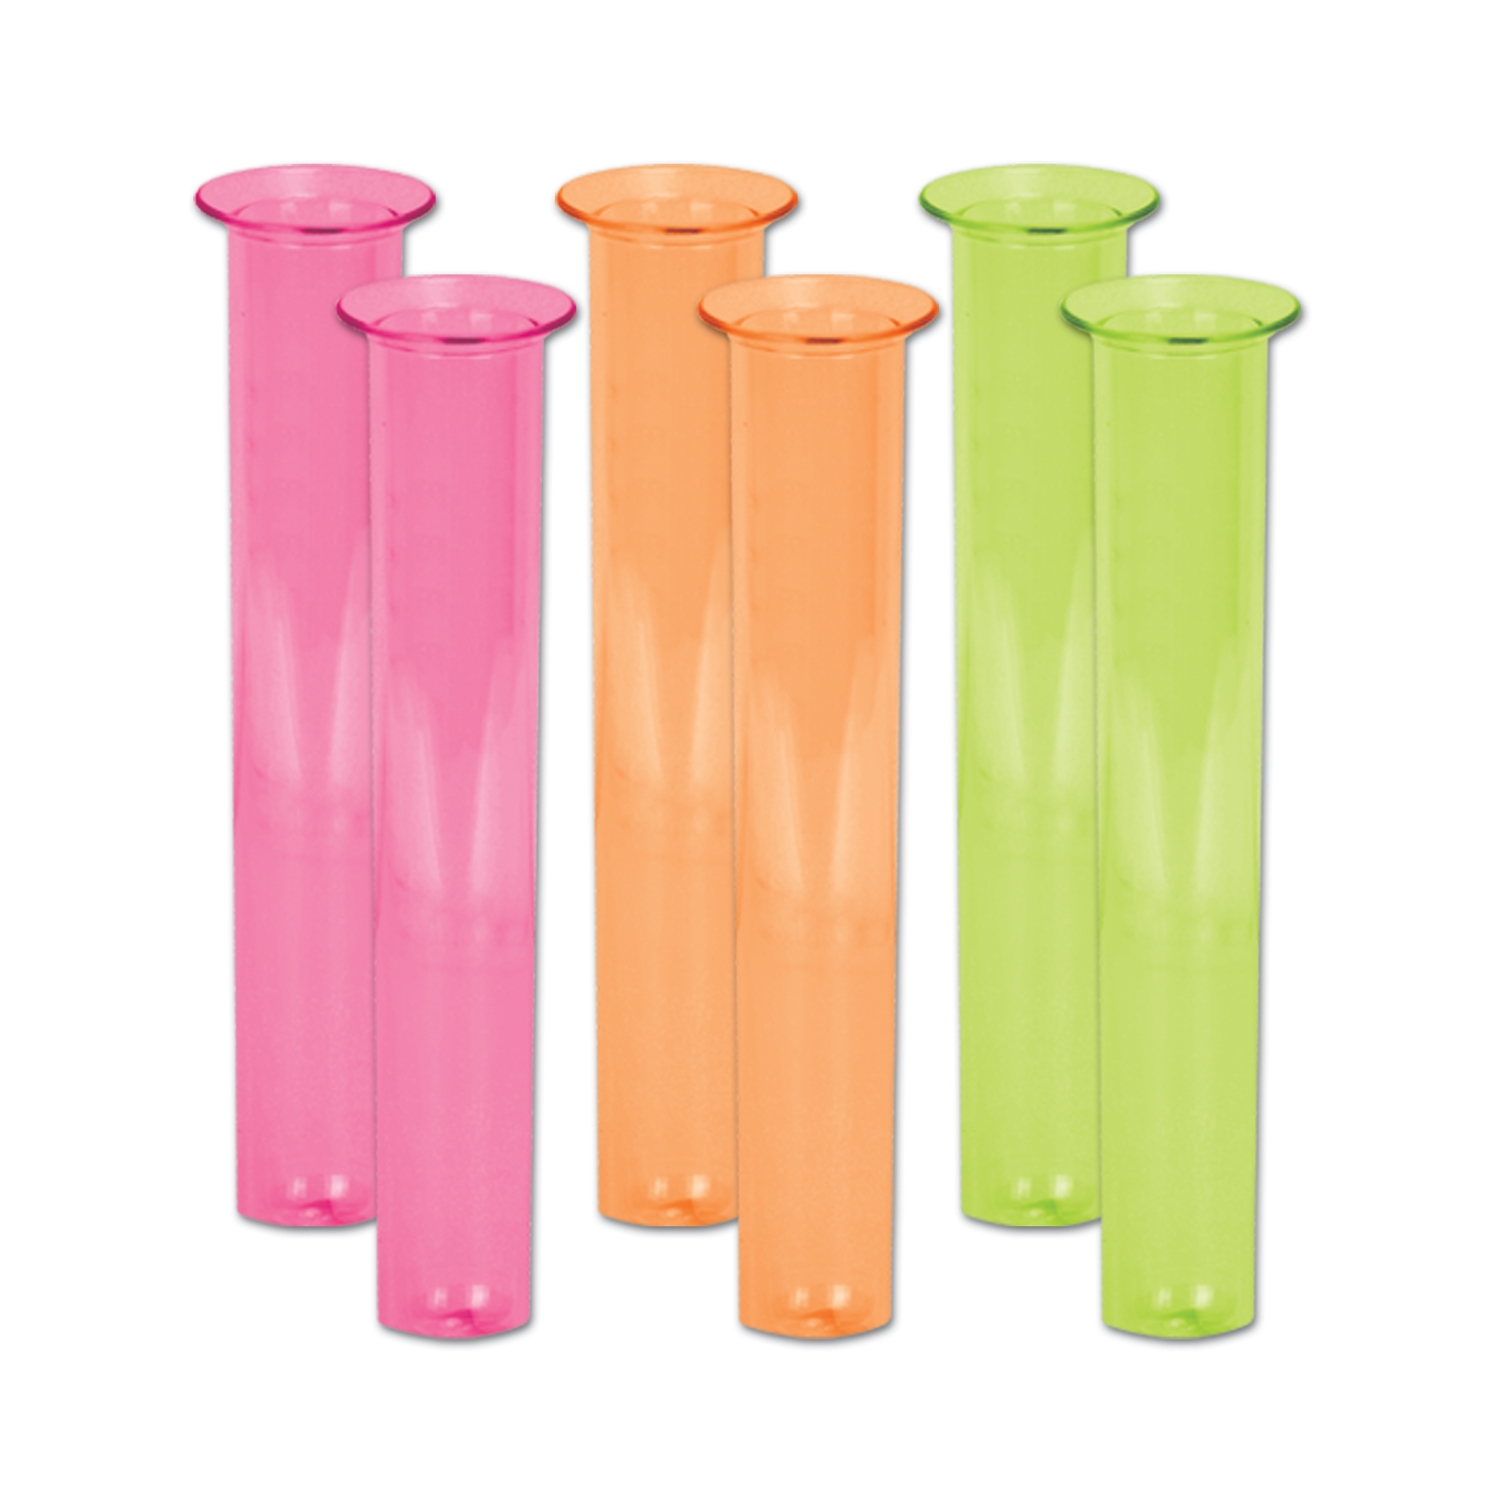 Neon colored shot glasses shaped to replicate test tubes.